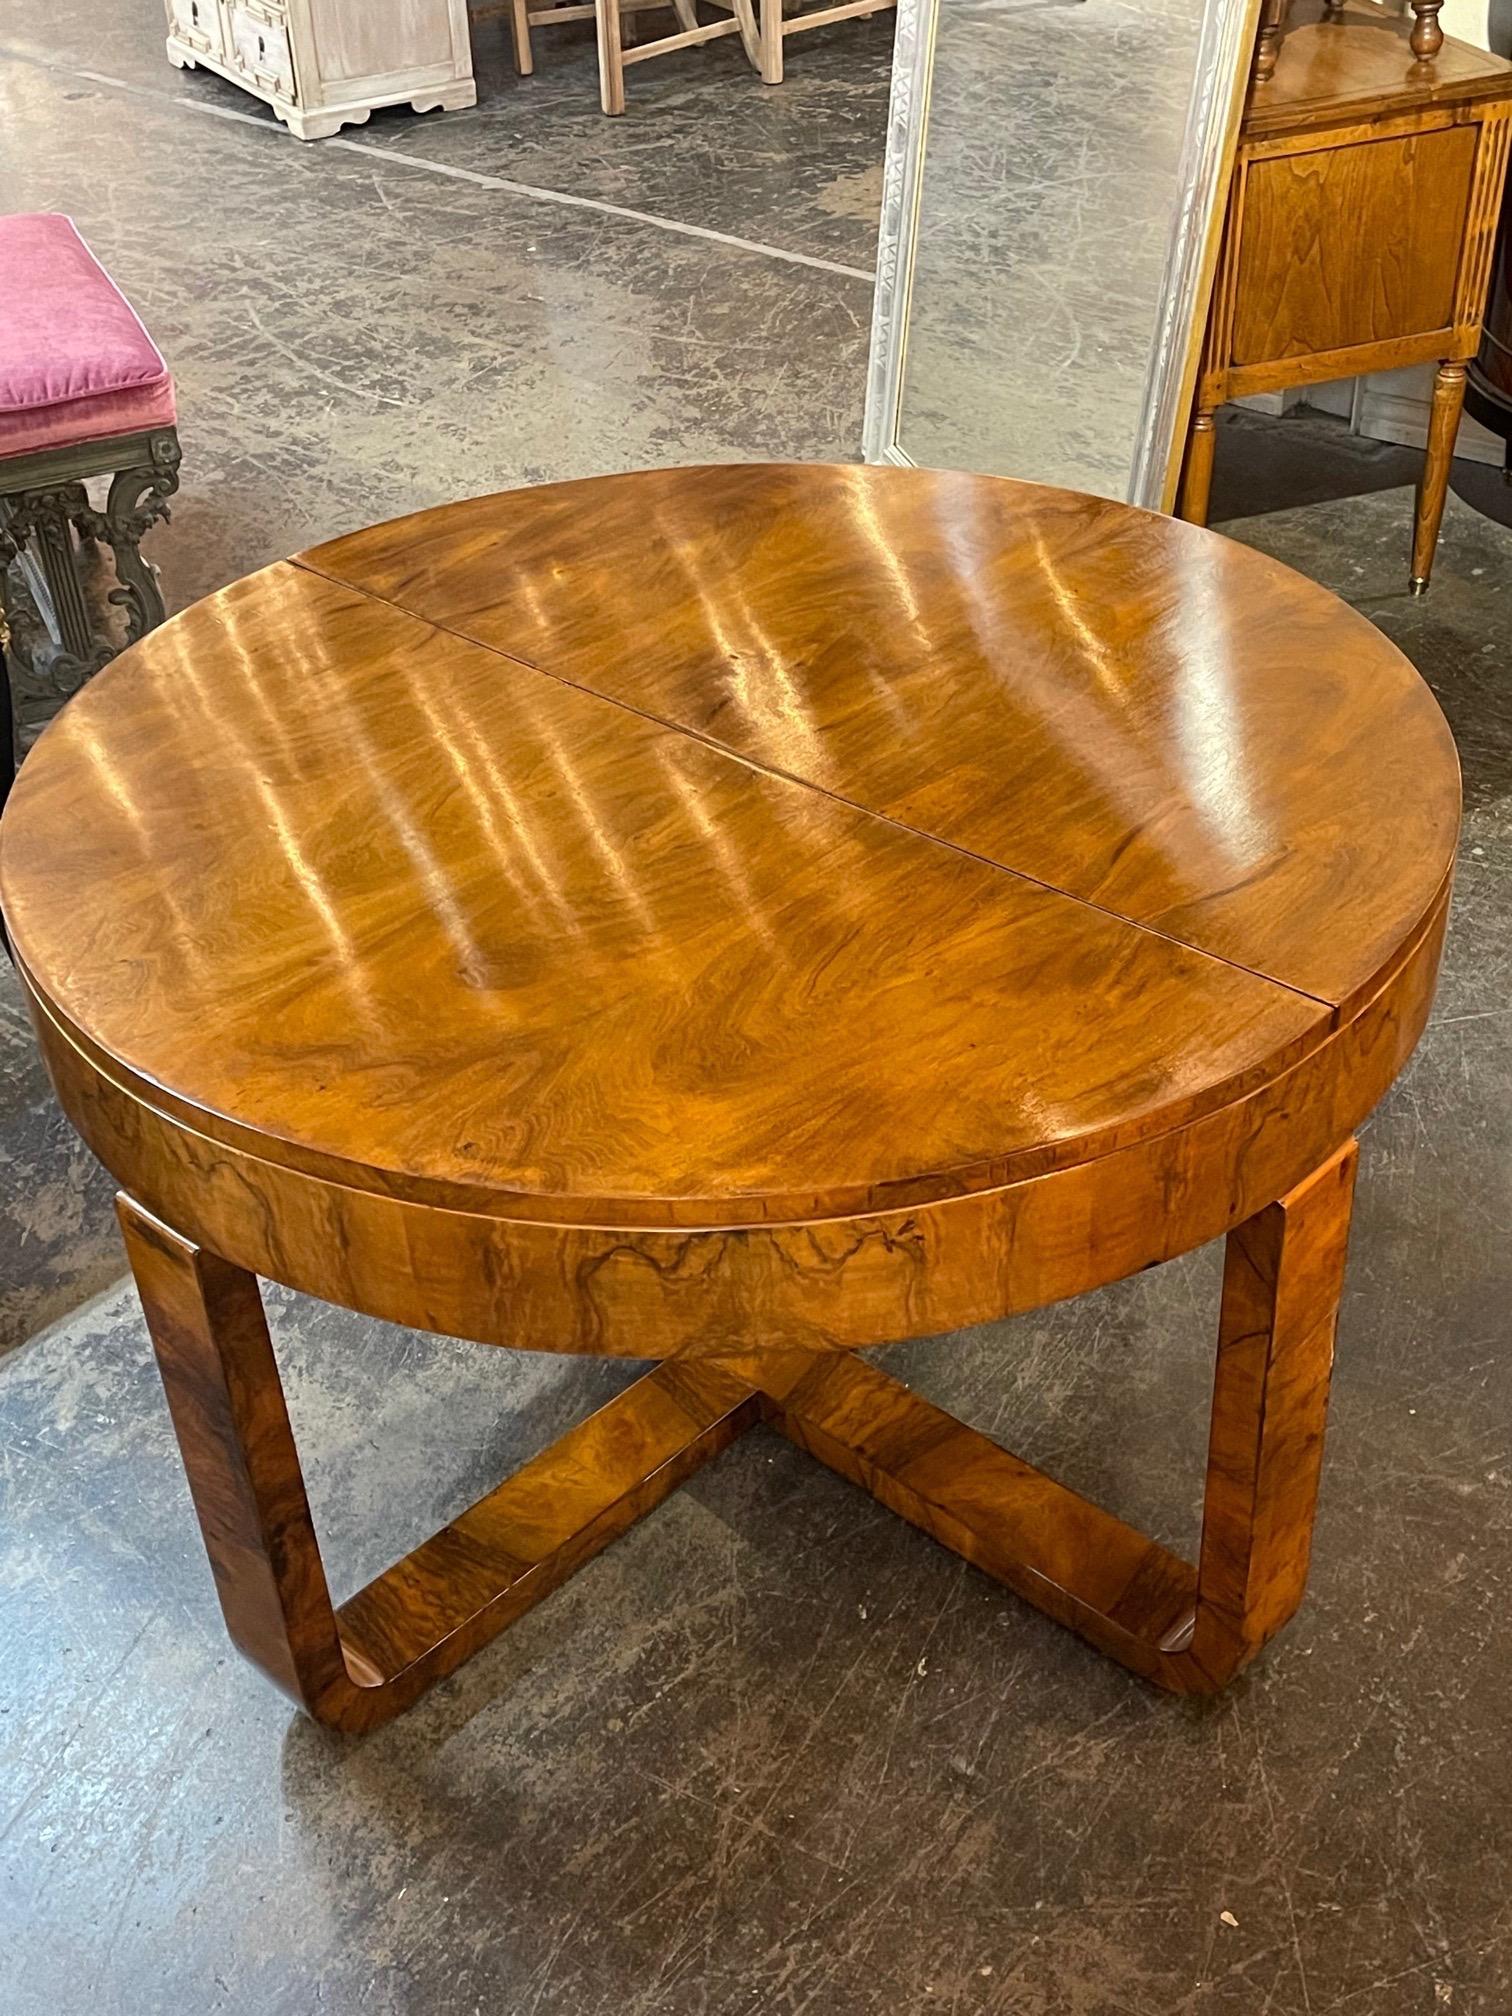 Very fine vintage French Art Deco style walnut center table. Beautiful finish on this sophisticated piece. Creates a fabulous polished look!